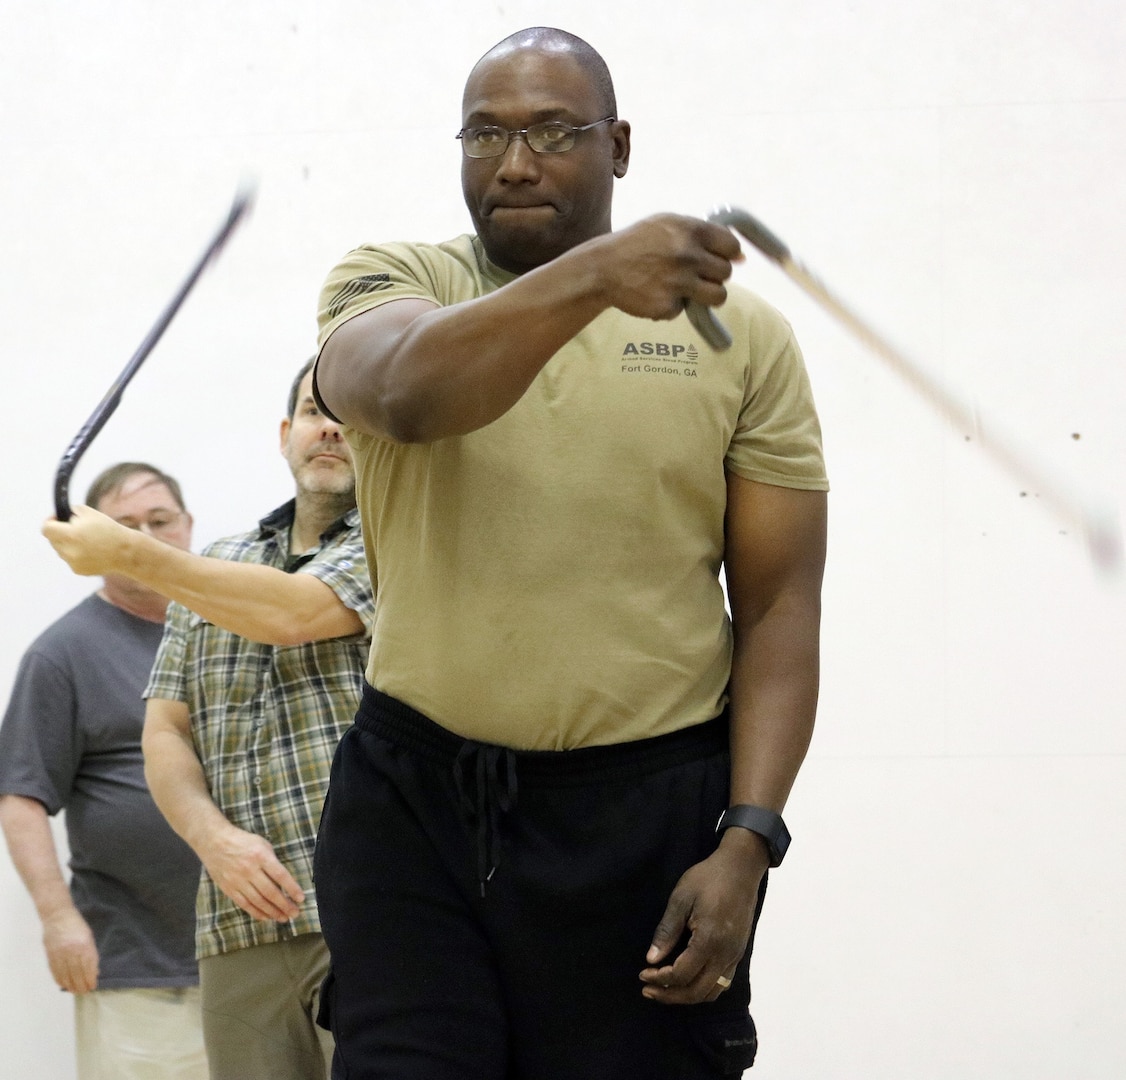 Chief Warrant Officer 3 Robert Hunter, Brooke Army Medical Center Warrior Transition Battalion, puts his cane self-defense tactics to use during a training session Feb. 3, in the Jimmy Brought Fitness Center, Joint Base San Antonio-Fort Sam Houston. Hunter was one of 40 active duty service members, wounded warriors, veterans and family members who attended the three-hour session to learn the intricacies of cane self-defense.